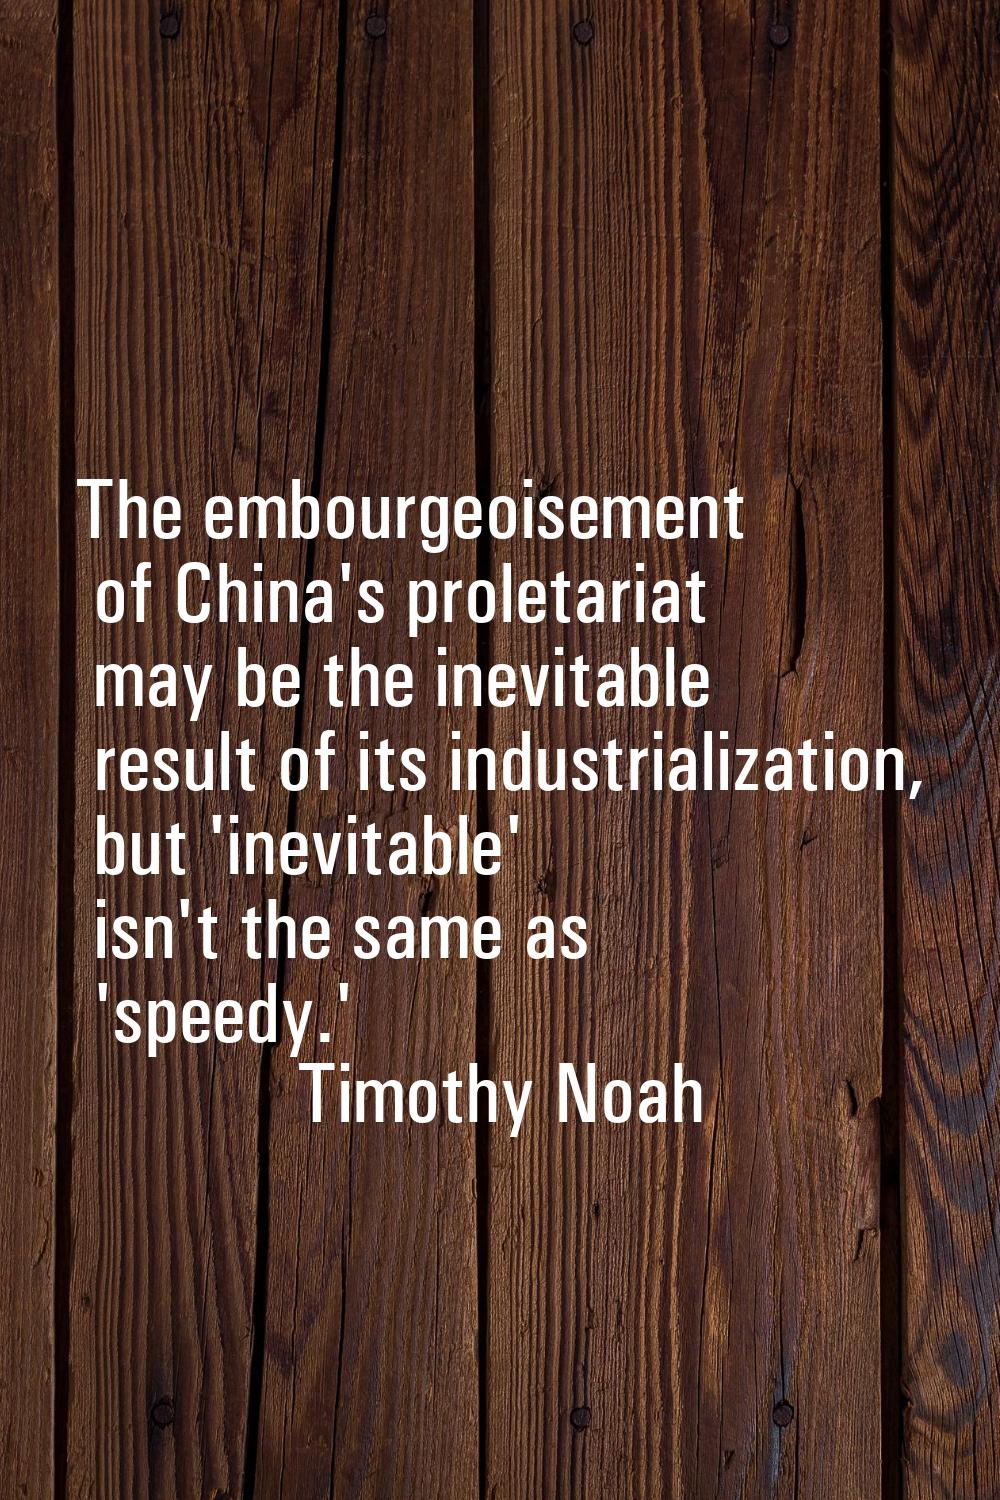 The embourgeoisement of China's proletariat may be the inevitable result of its industrialization, 